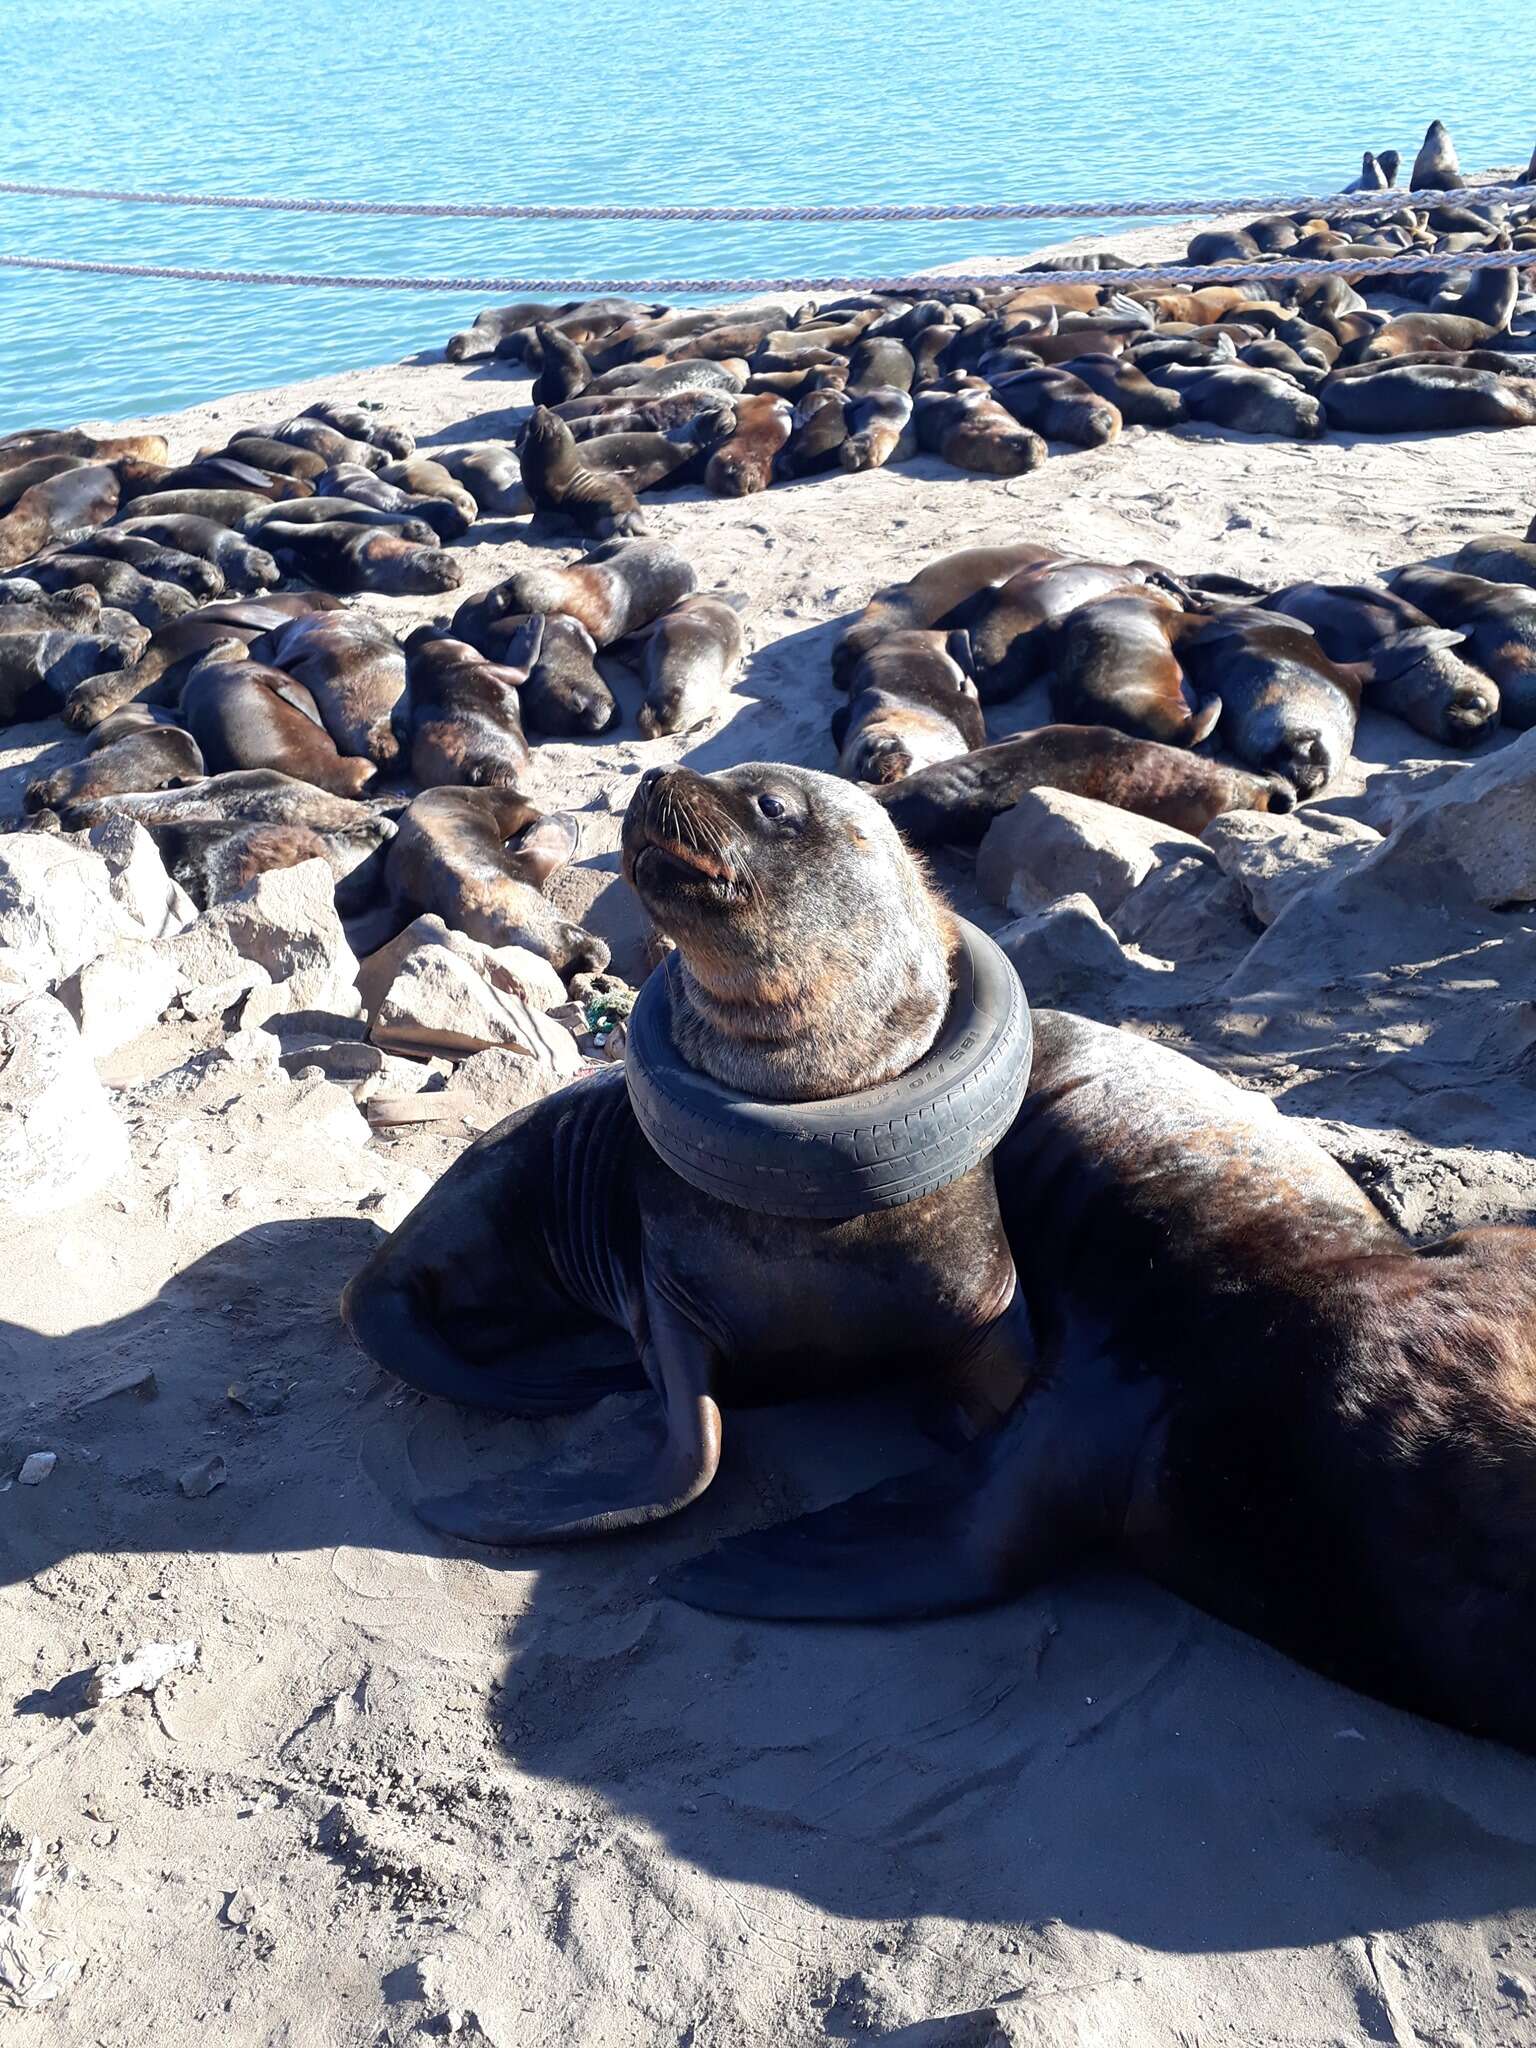 Asea lion in Argentina with a tire around his neck